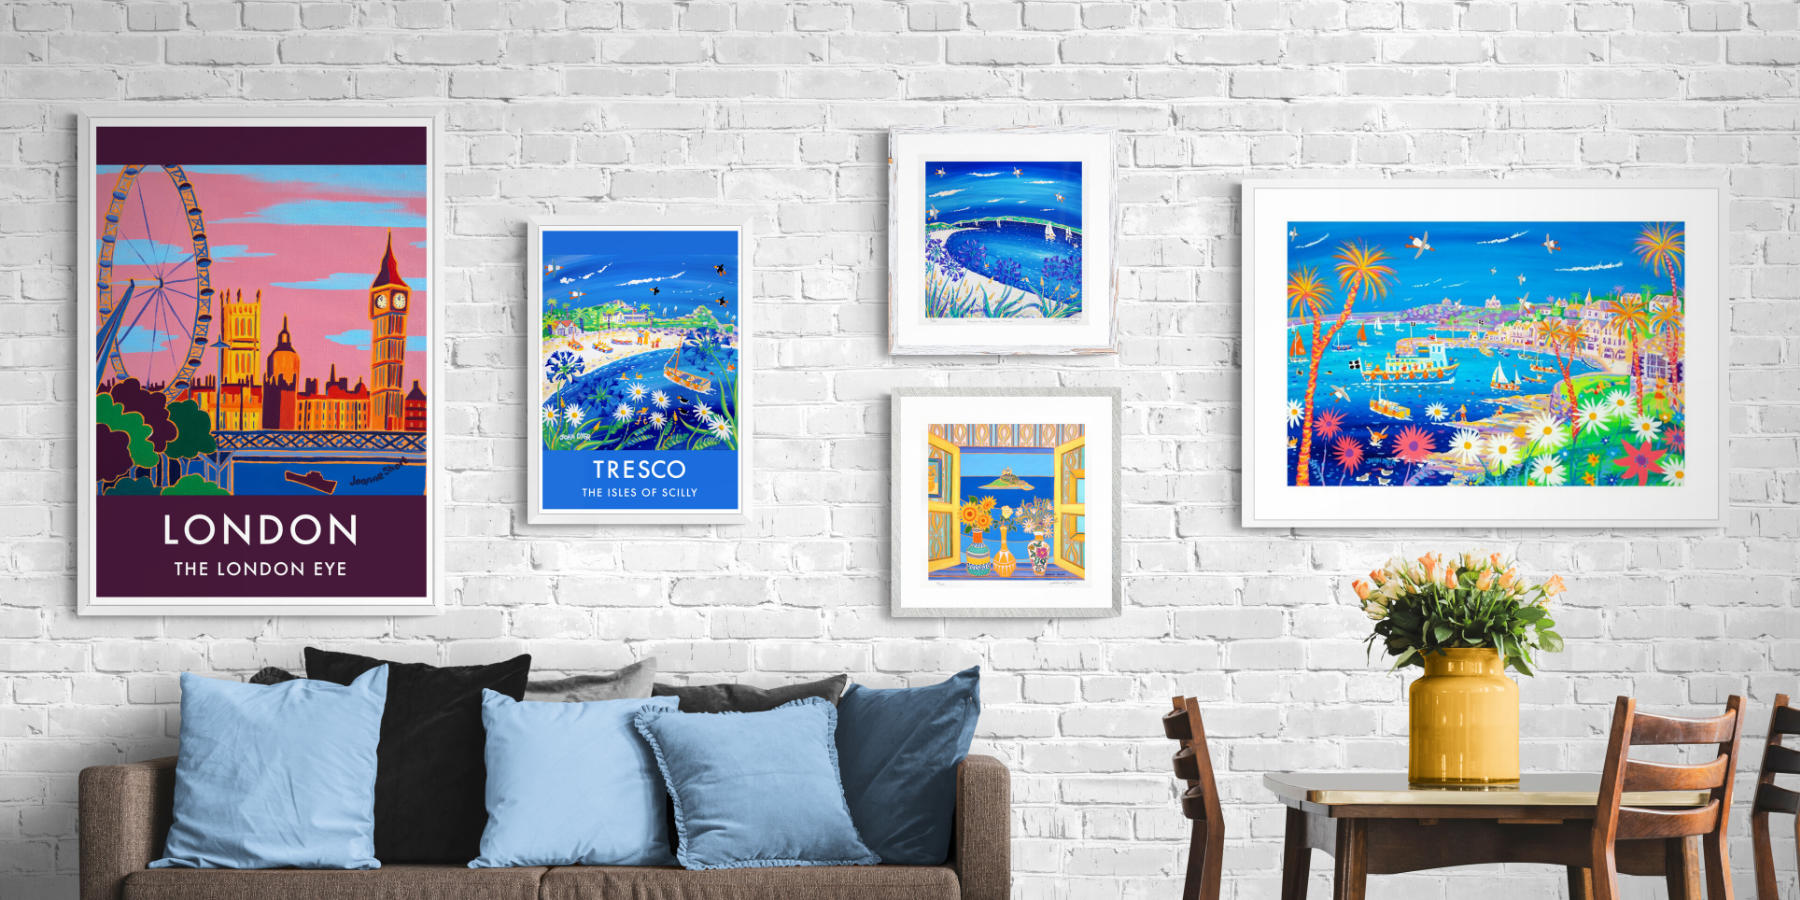 fine art prints and posters displayed in a contemporary setting